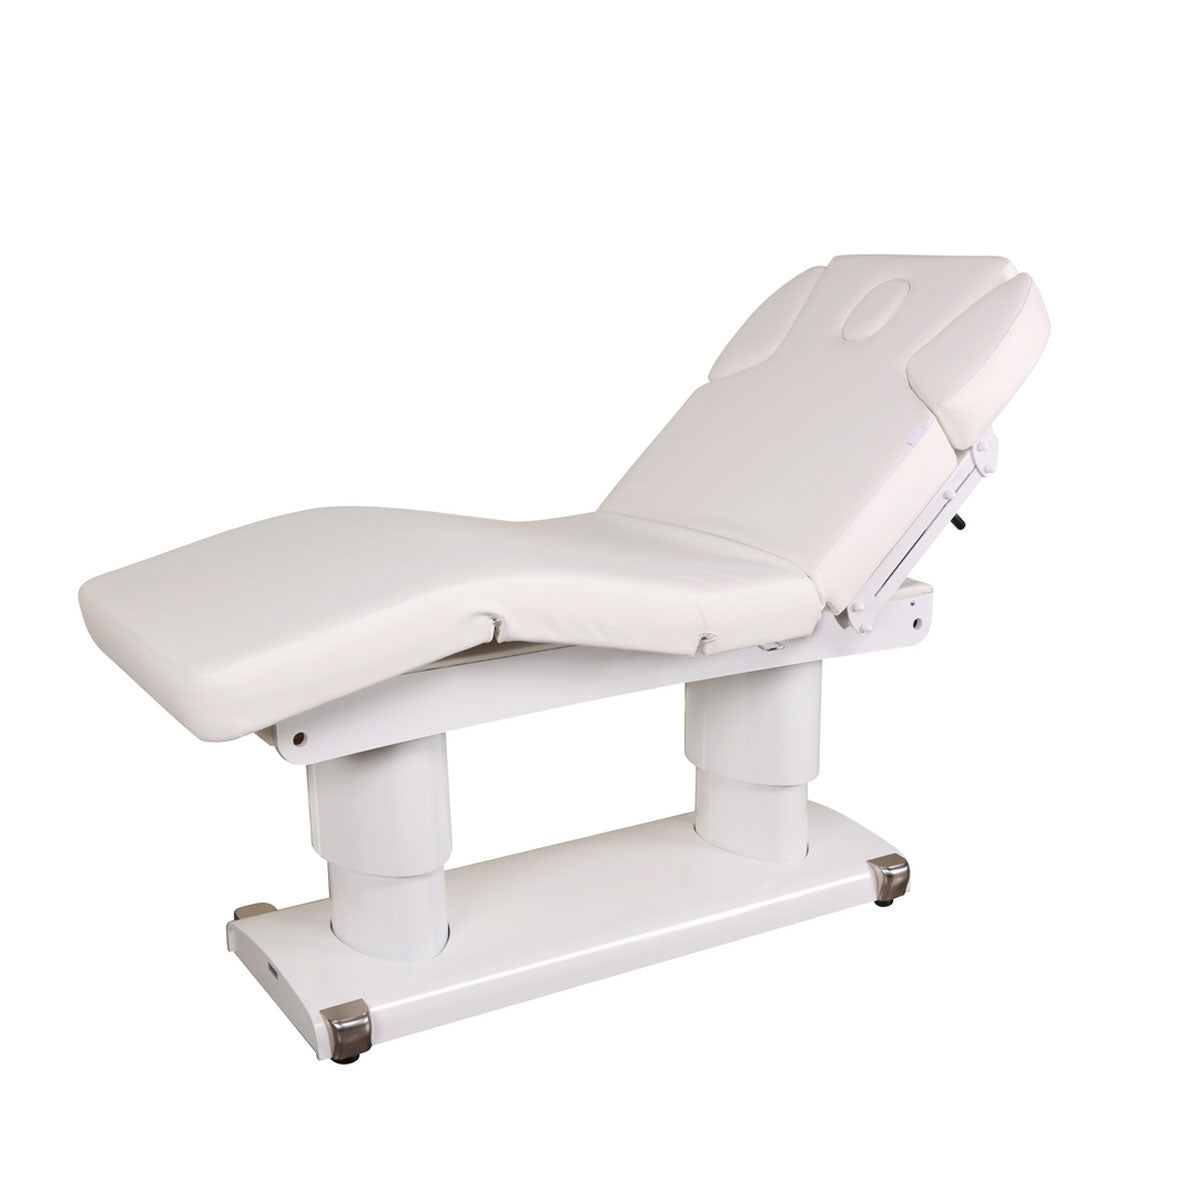 SPAMARC . Cooper . Massage bed . Wooden . 3 electric motor (STB)